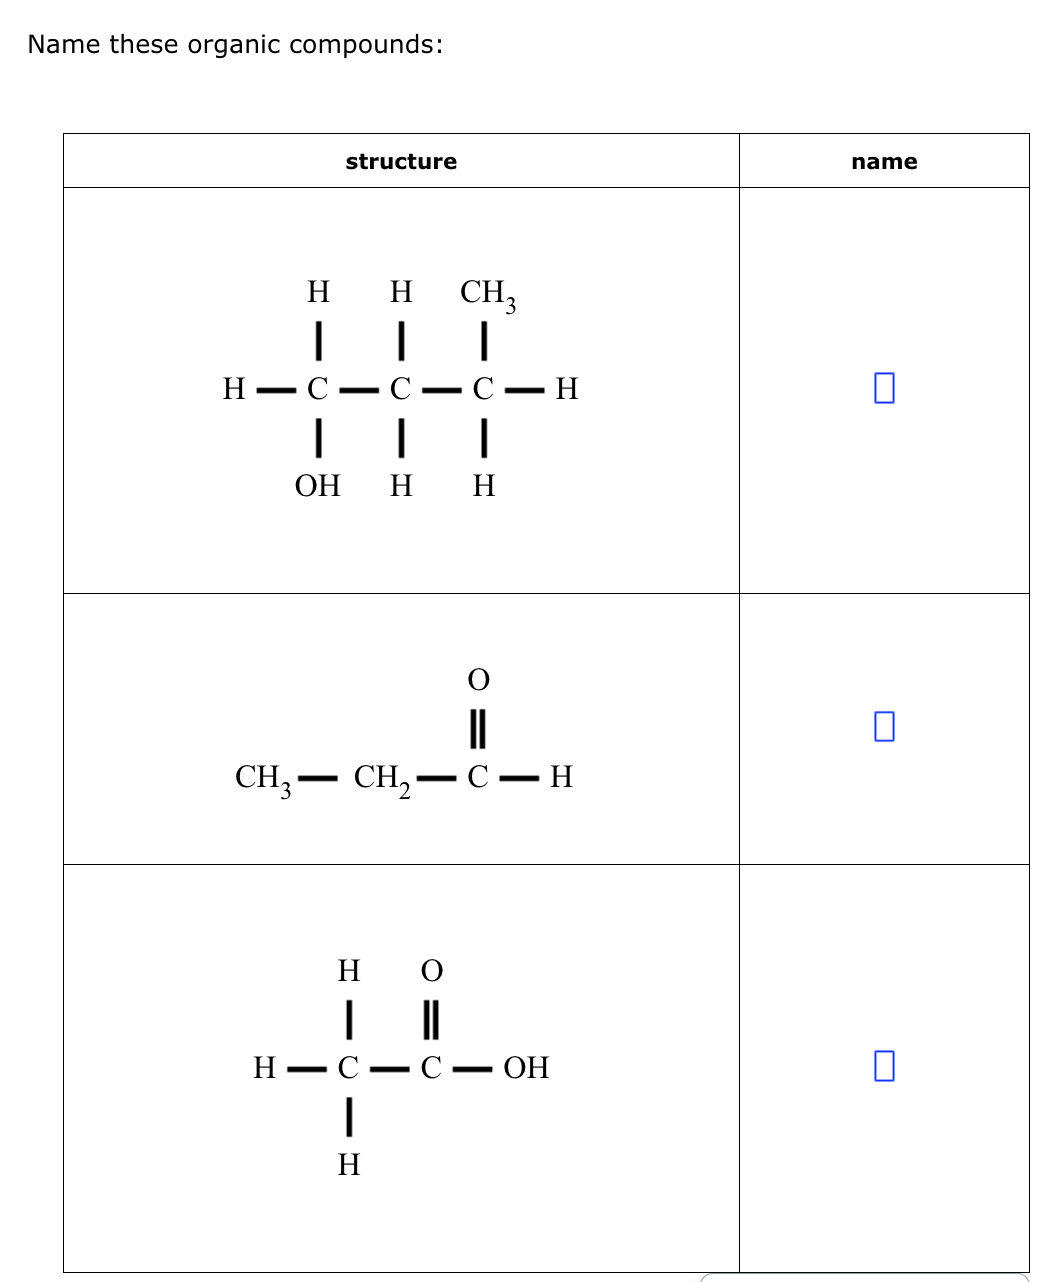 Name these organic compounds:
H-
structure
C.
H
H
| | |
CH₂
-
C C H
| | |
OH
H H
CH3 CH₂- C-H
H O
||
4
H-
-
C C - OH
H
name
0